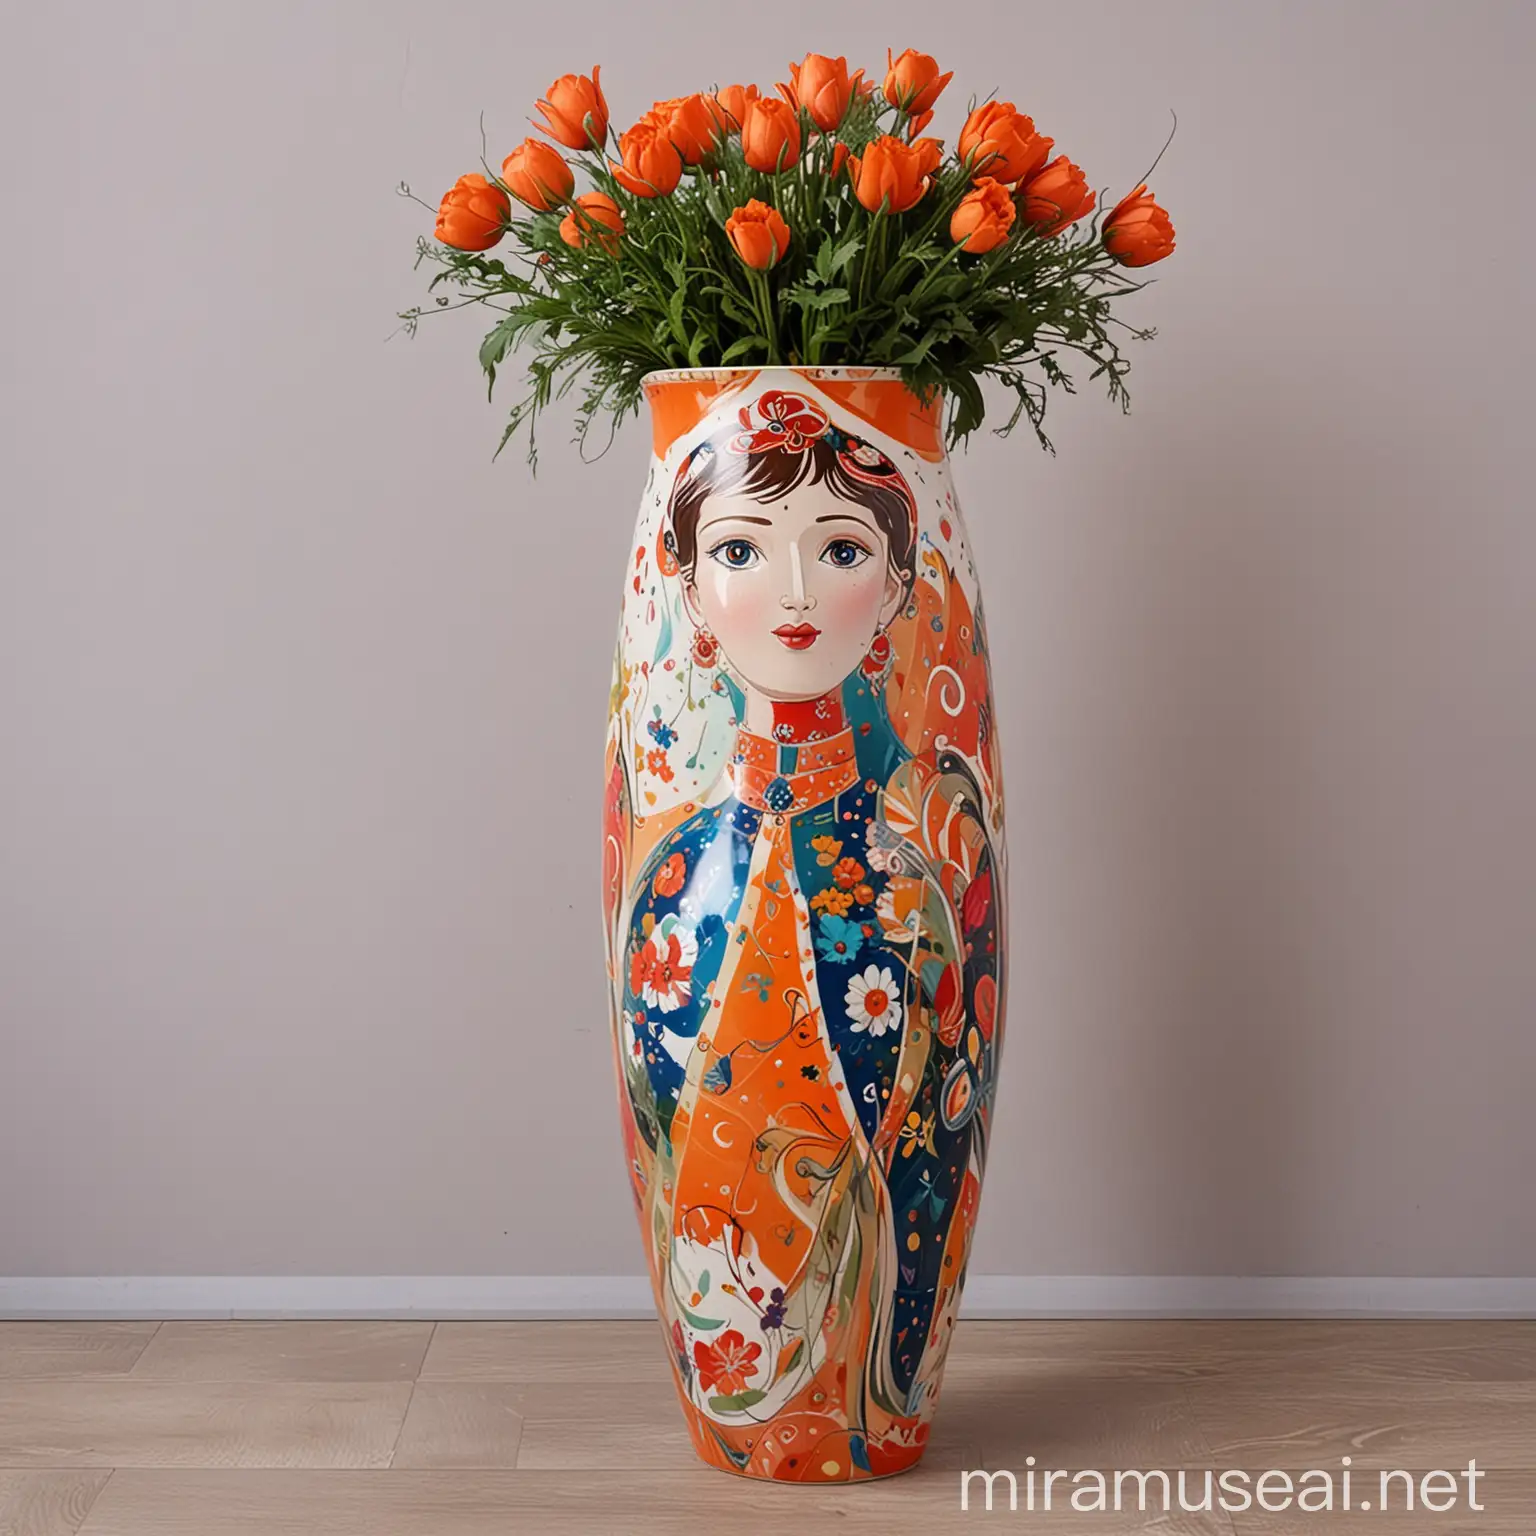 Modern Abstract Ceramic Vase Inspired by Petrushka Ballet Character